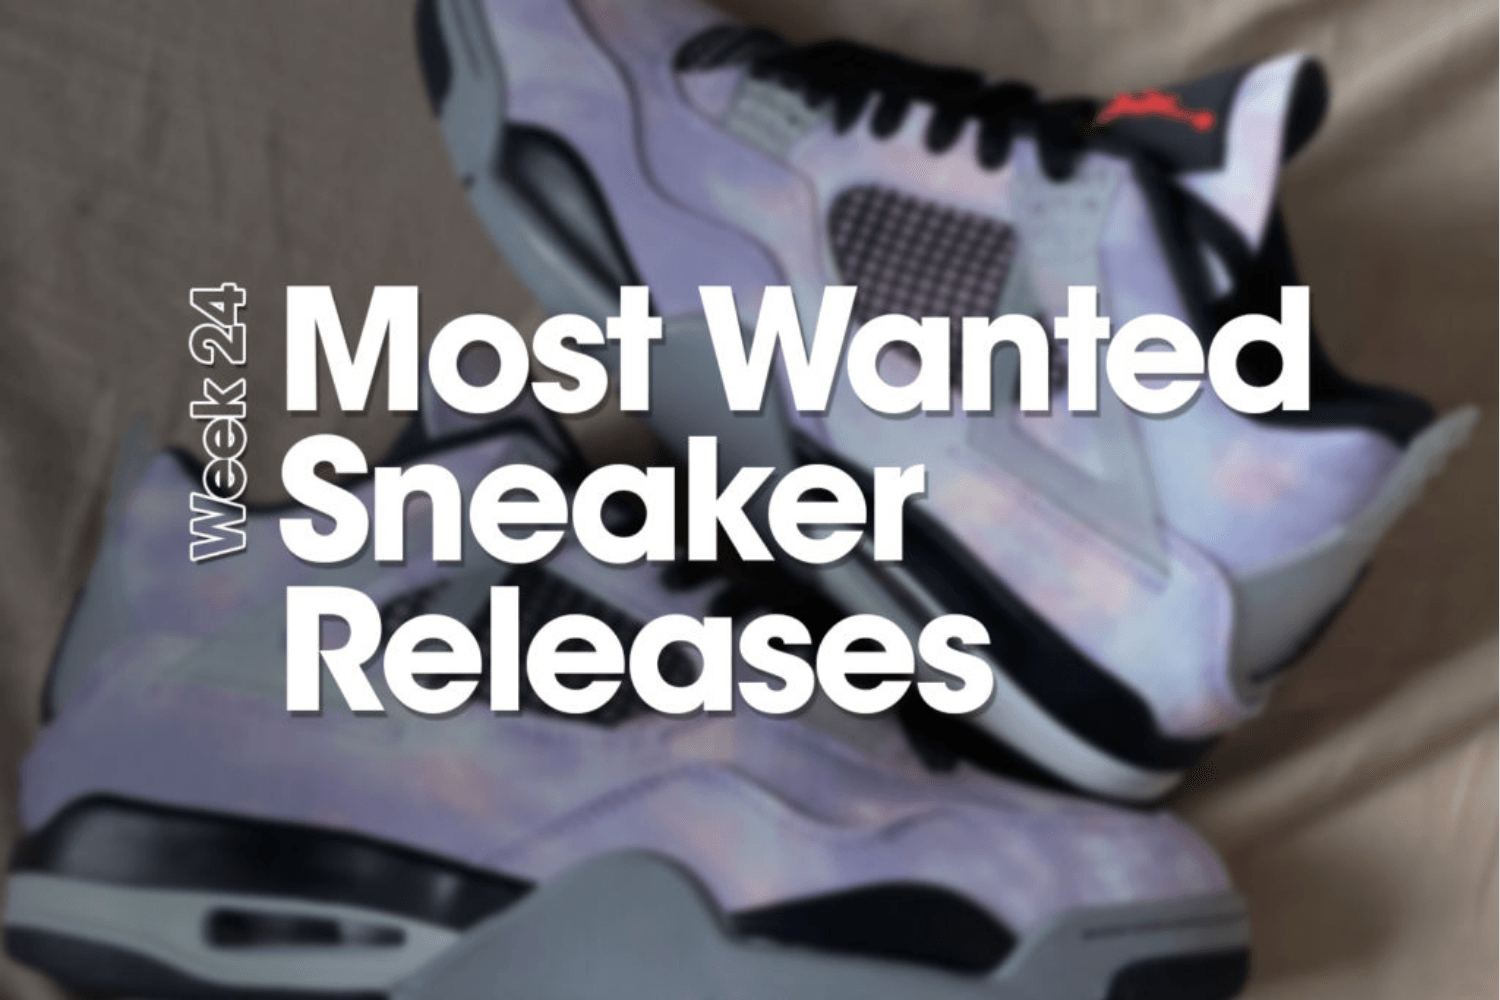 Most Wanted Sneaker Releases – Woche 24